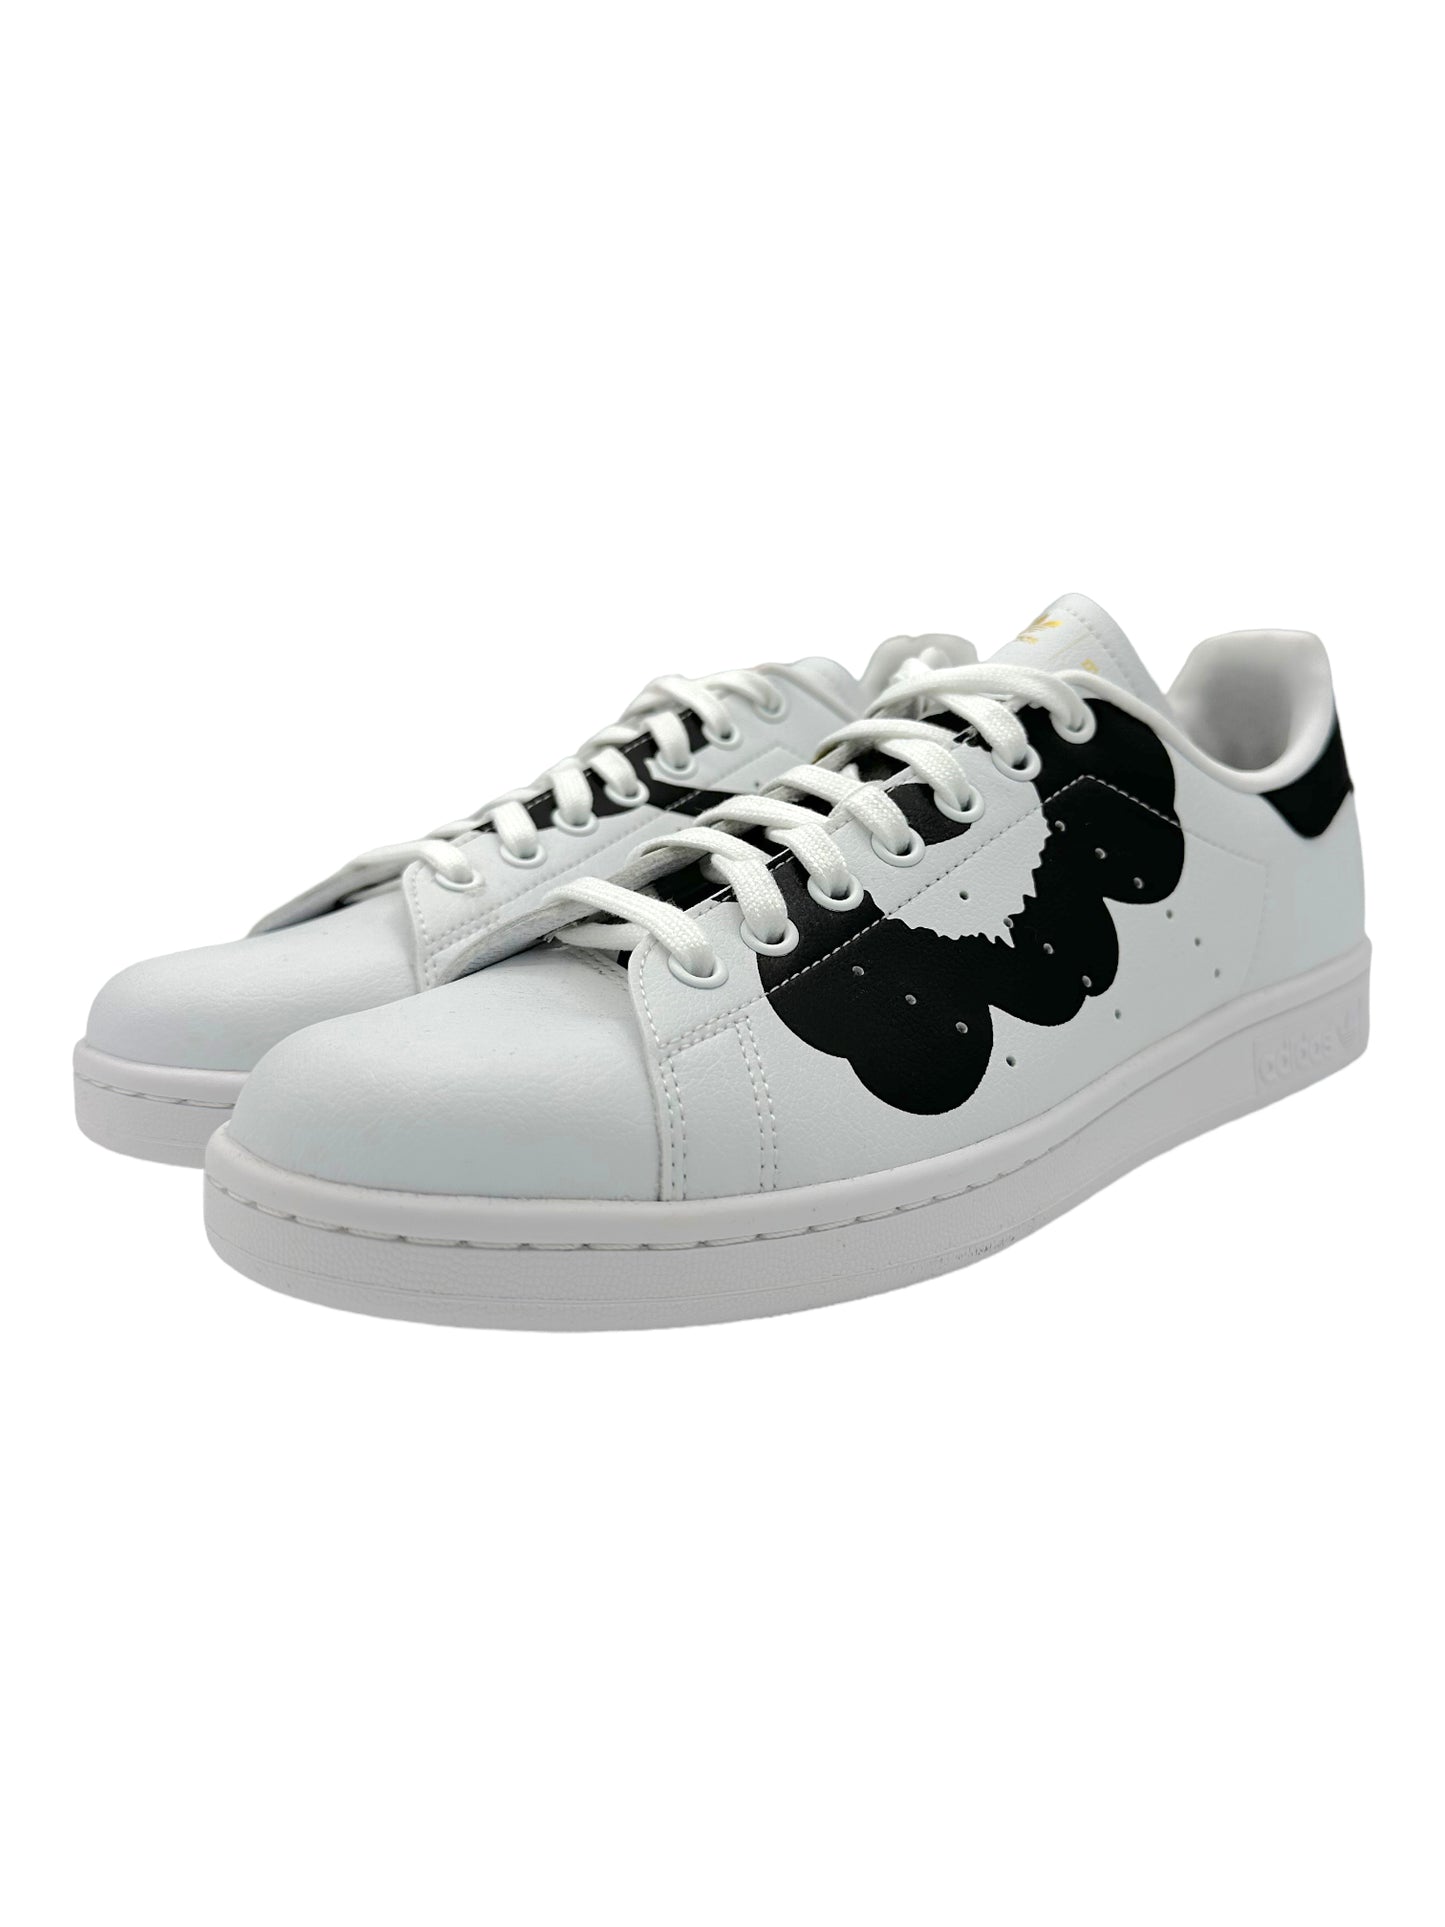 Adidas White Stan Smith Marimekko Unikko Sneakers - Genuine Design Luxury Consignment for Men. New & Pre-Owned Clothing, Shoes, & Accessories. Calgary, Canada